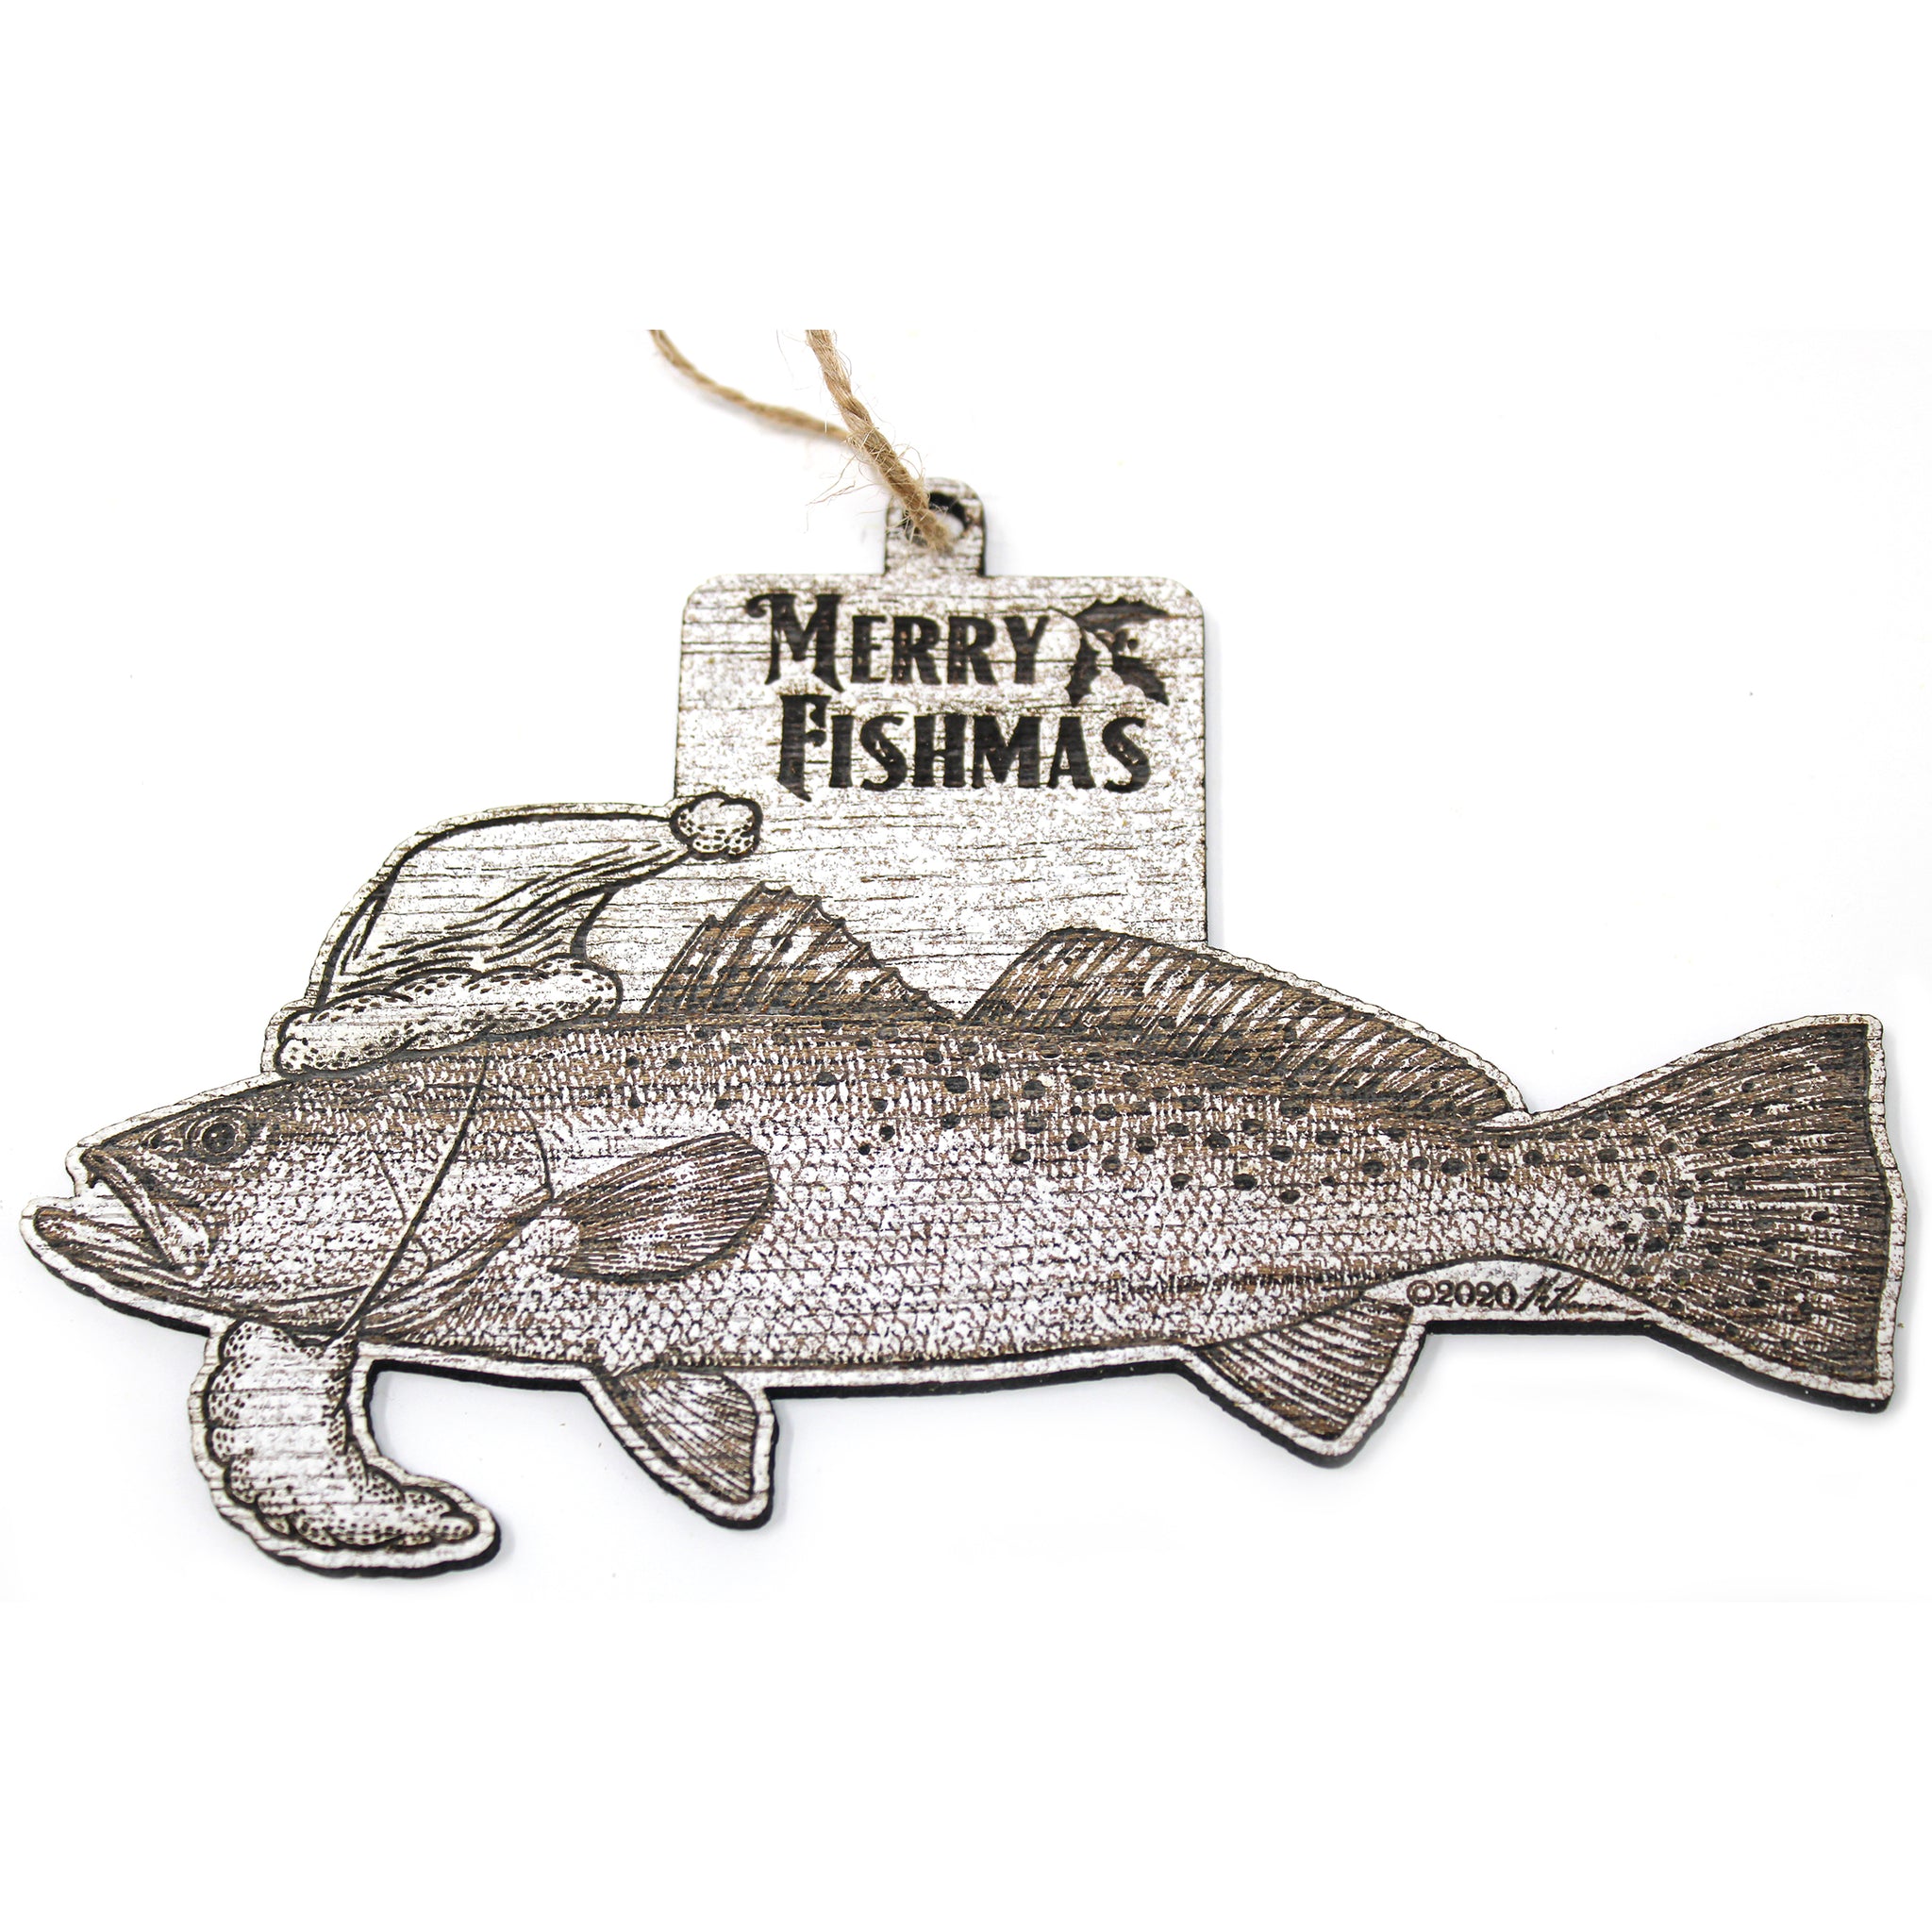 Wood Christmas Ornaments - Spotted Sea Trout Fishmas Ornaments